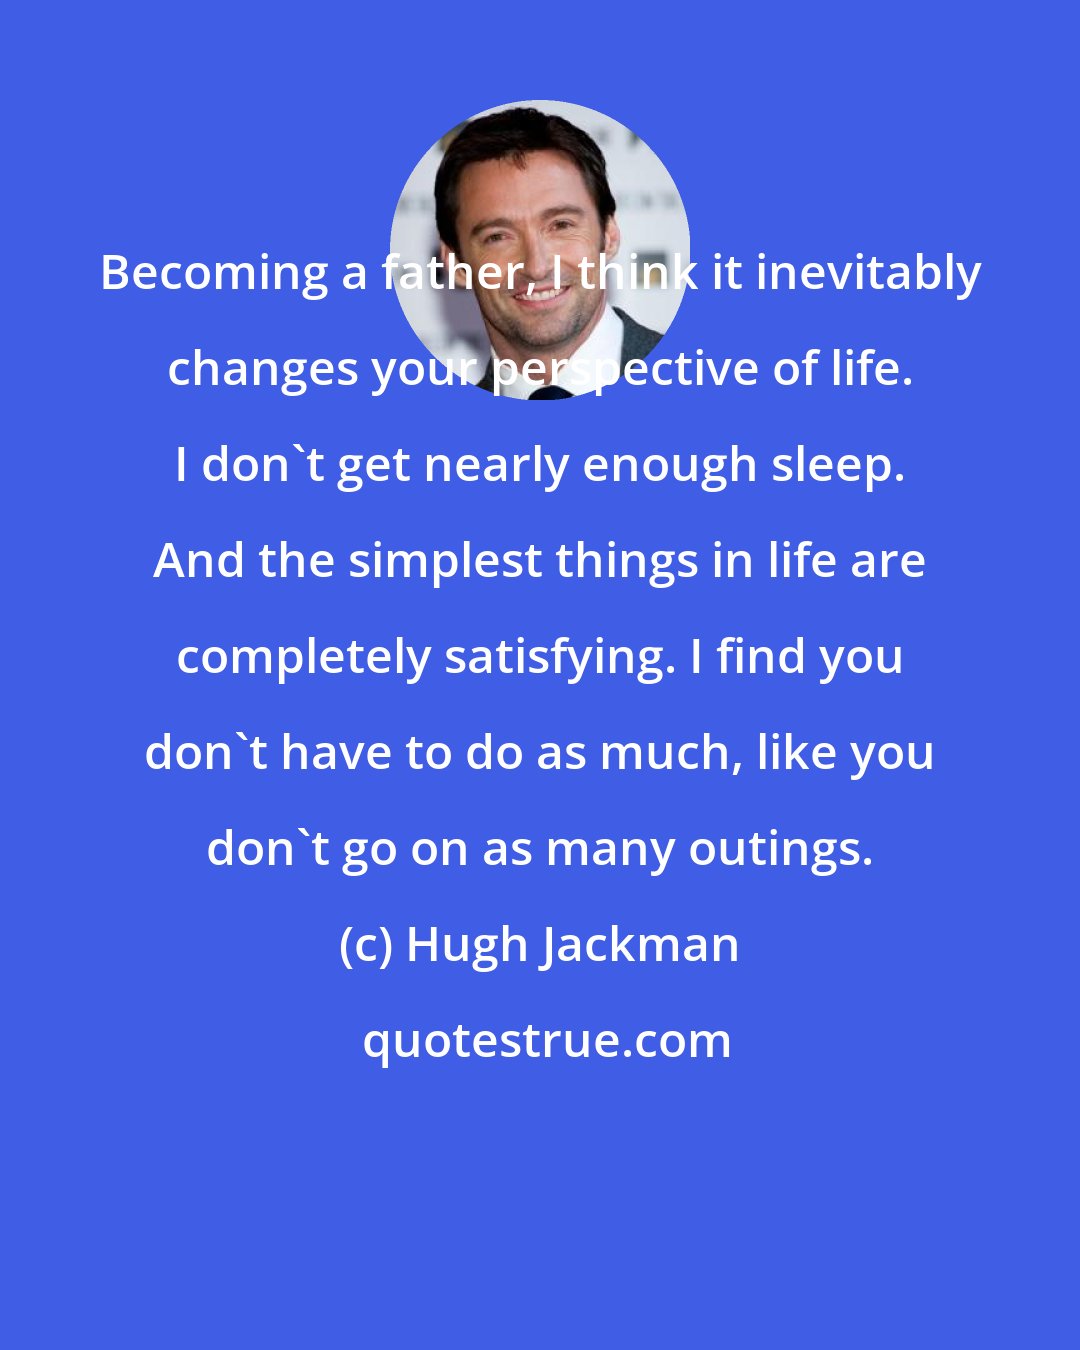 Hugh Jackman: Becoming a father, I think it inevitably changes your perspective of life. I don't get nearly enough sleep. And the simplest things in life are completely satisfying. I find you don't have to do as much, like you don't go on as many outings.